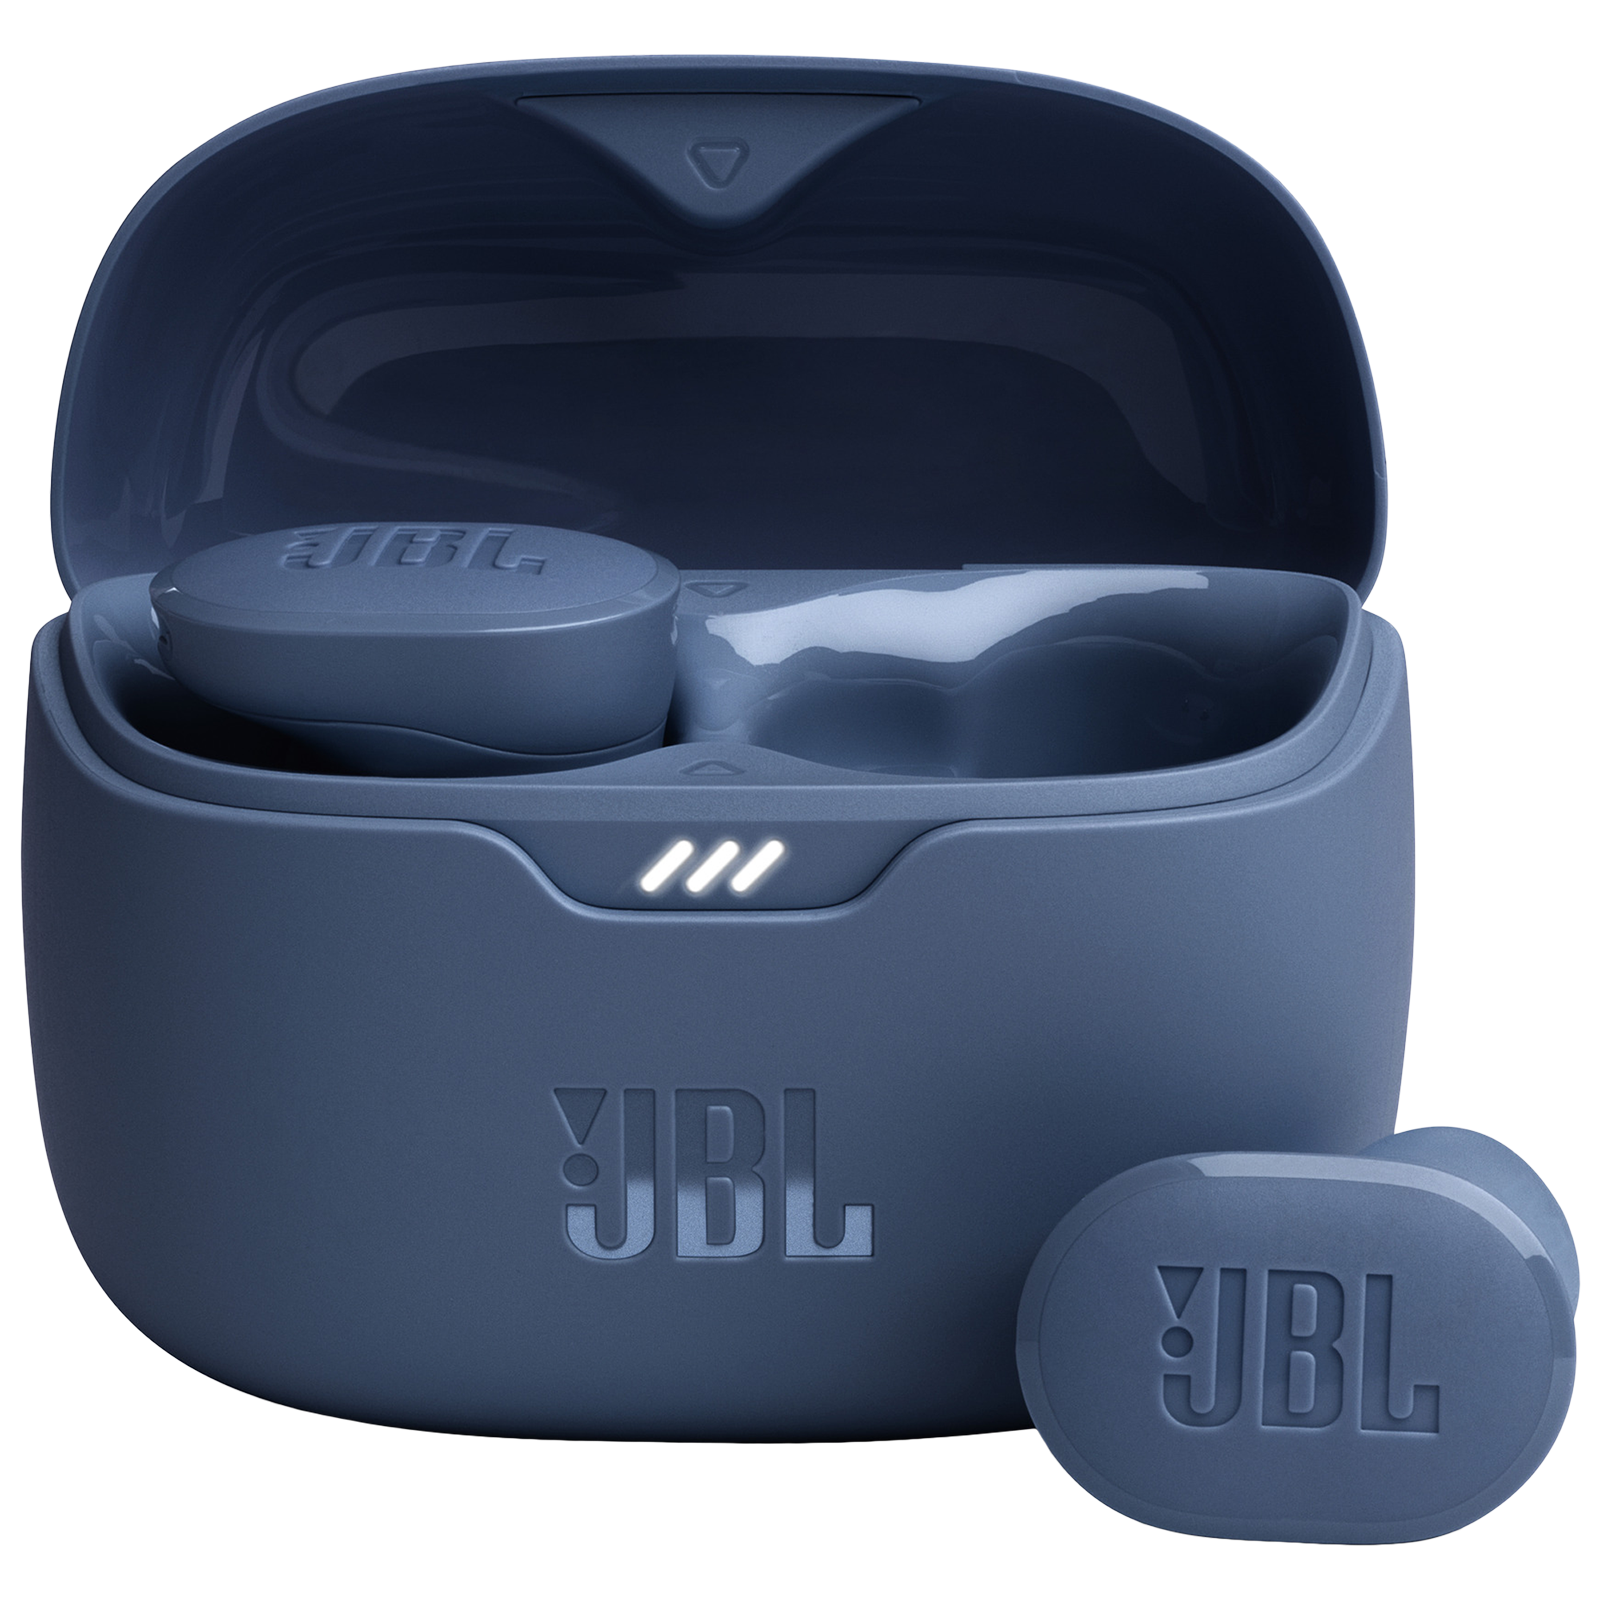 JBL Tune Buds JBLTBUDSBLU TWS Earbuds with Active Noise Cancellation (IP54 Water Resistant, Pure Bass Sound, Blue)